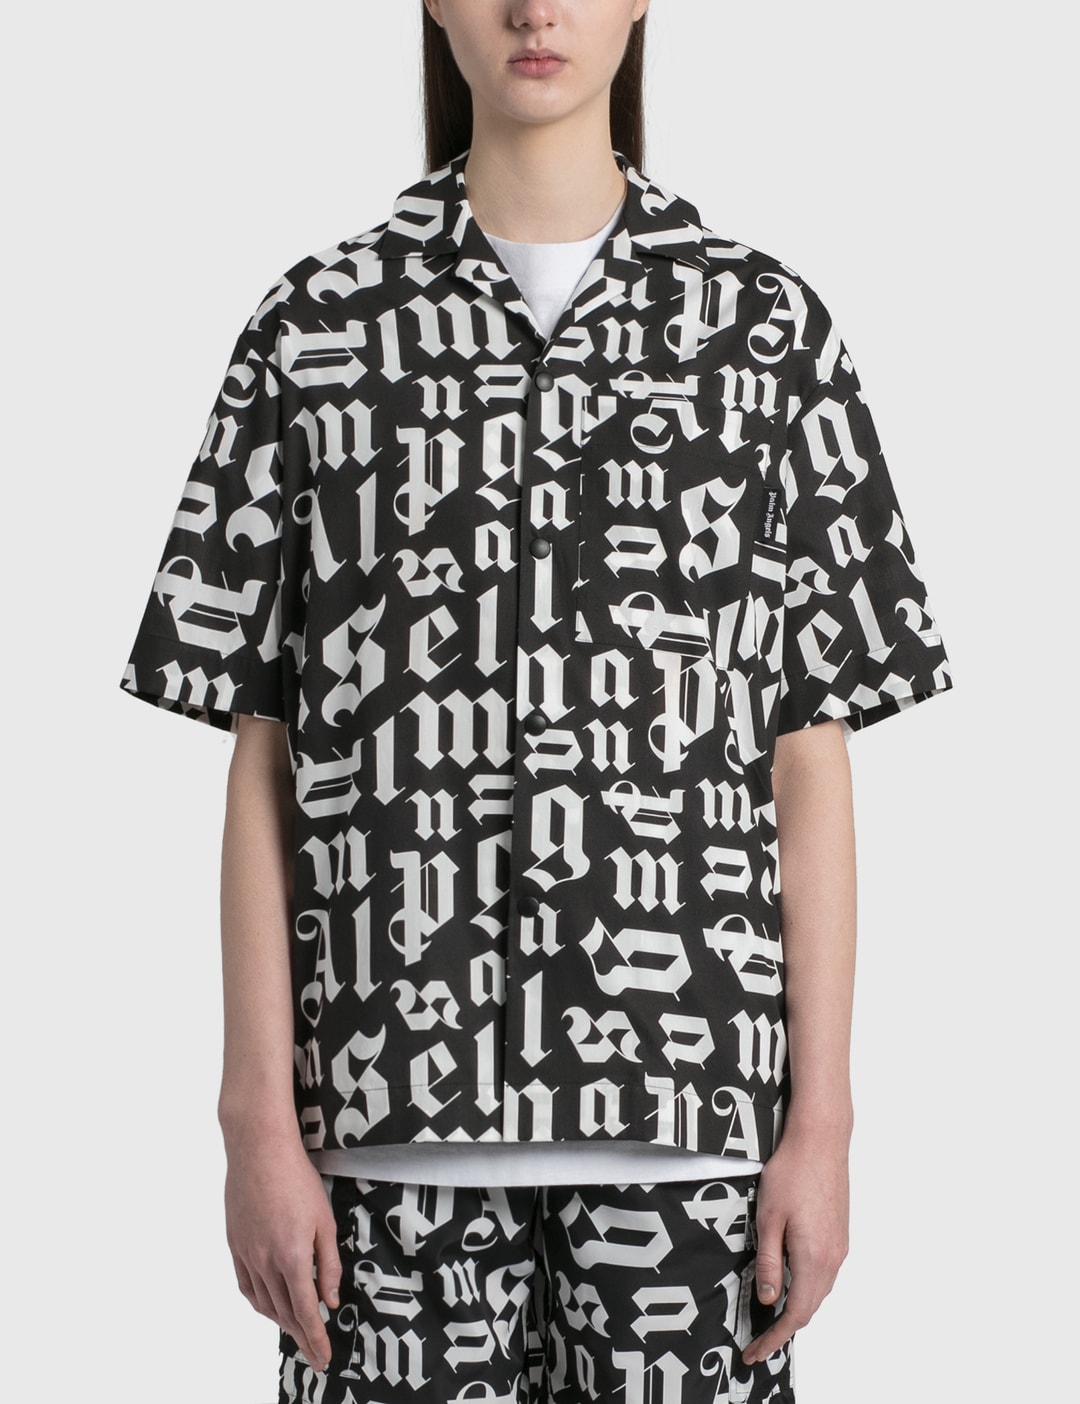 Monogram cotton t-shirt by Palm Angels